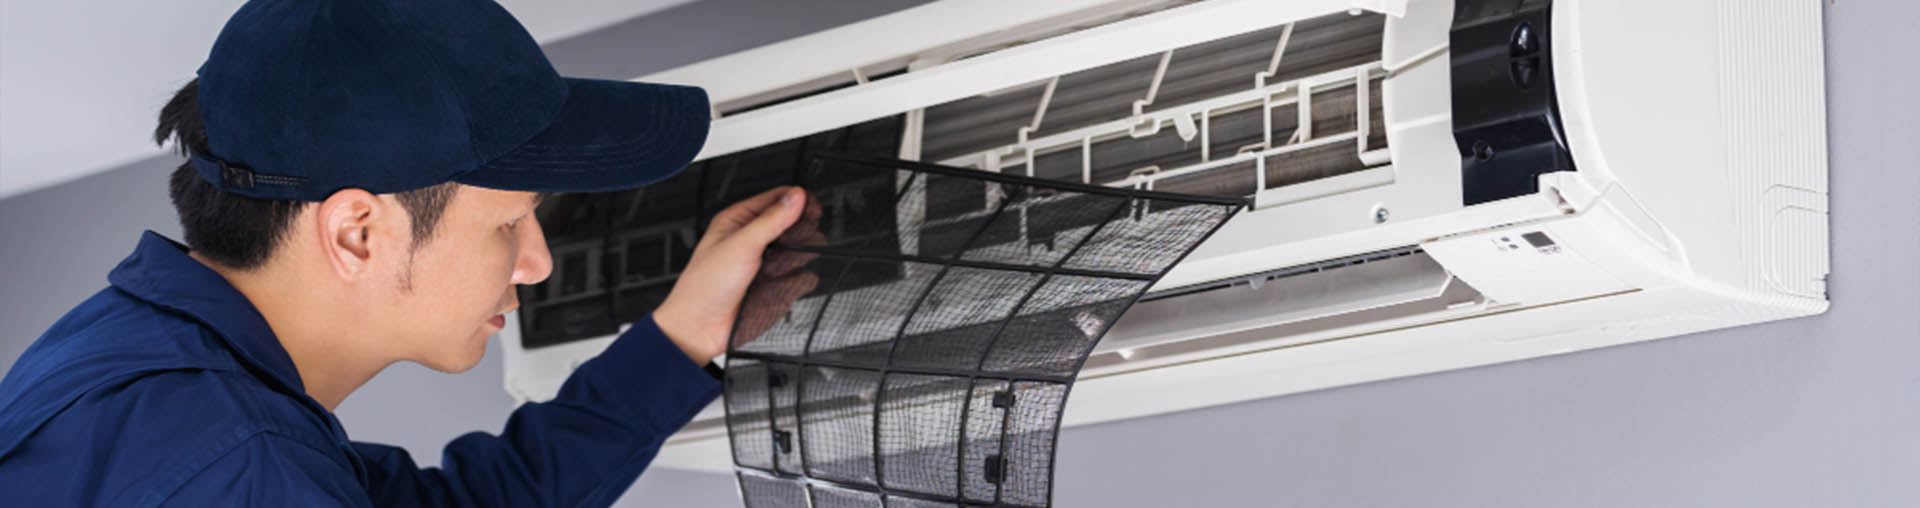 HVAC Piney Point, Quality Heating and Air Conditioning Service in Piney Point, TX